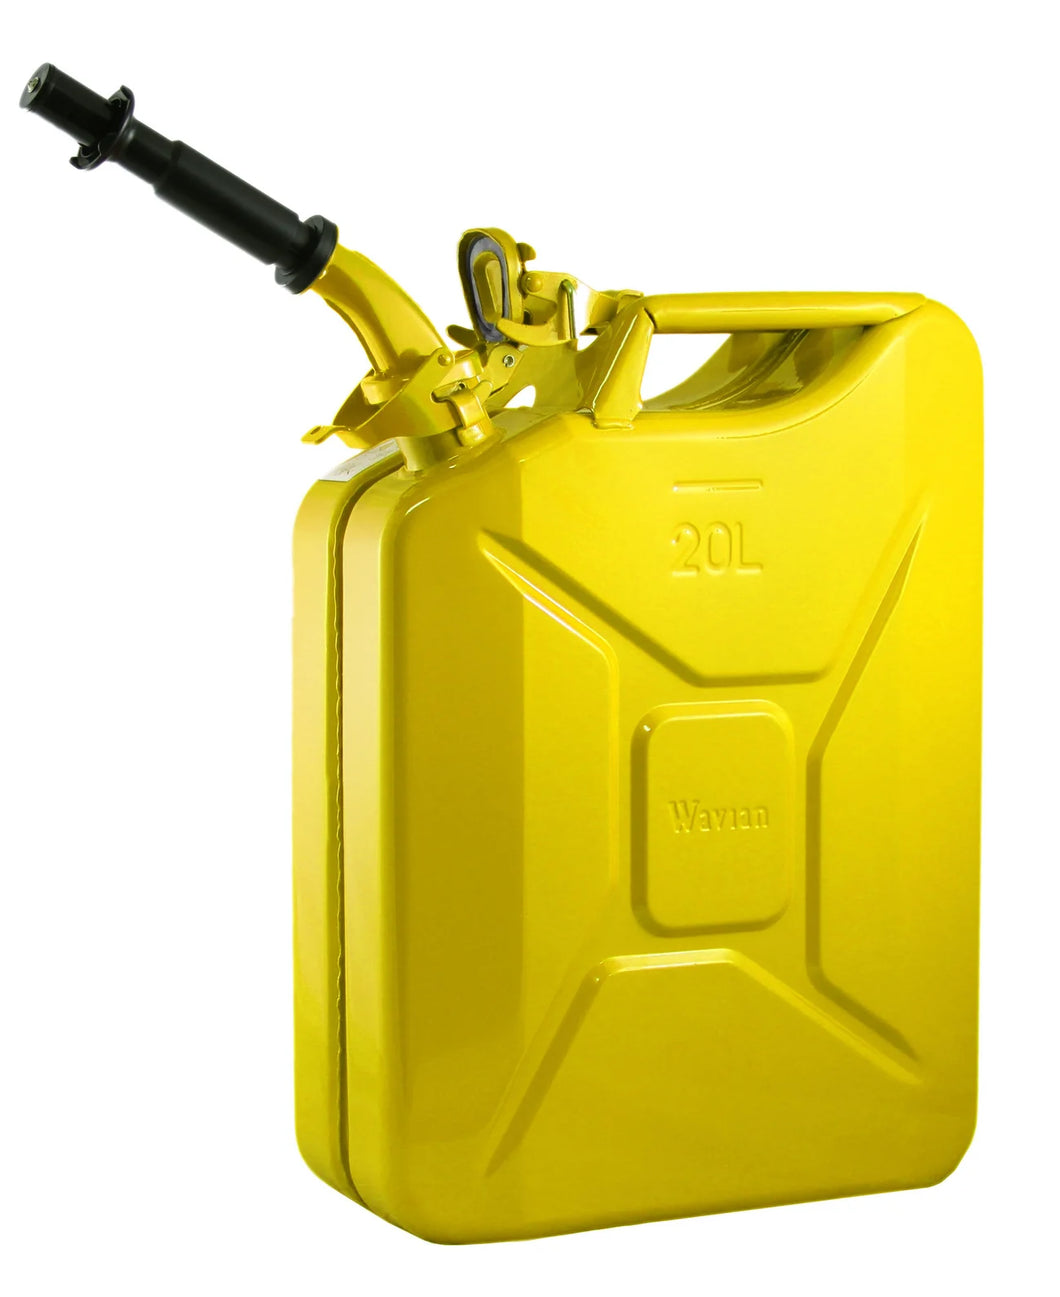 Wavian-Fuel Can 5 gallons